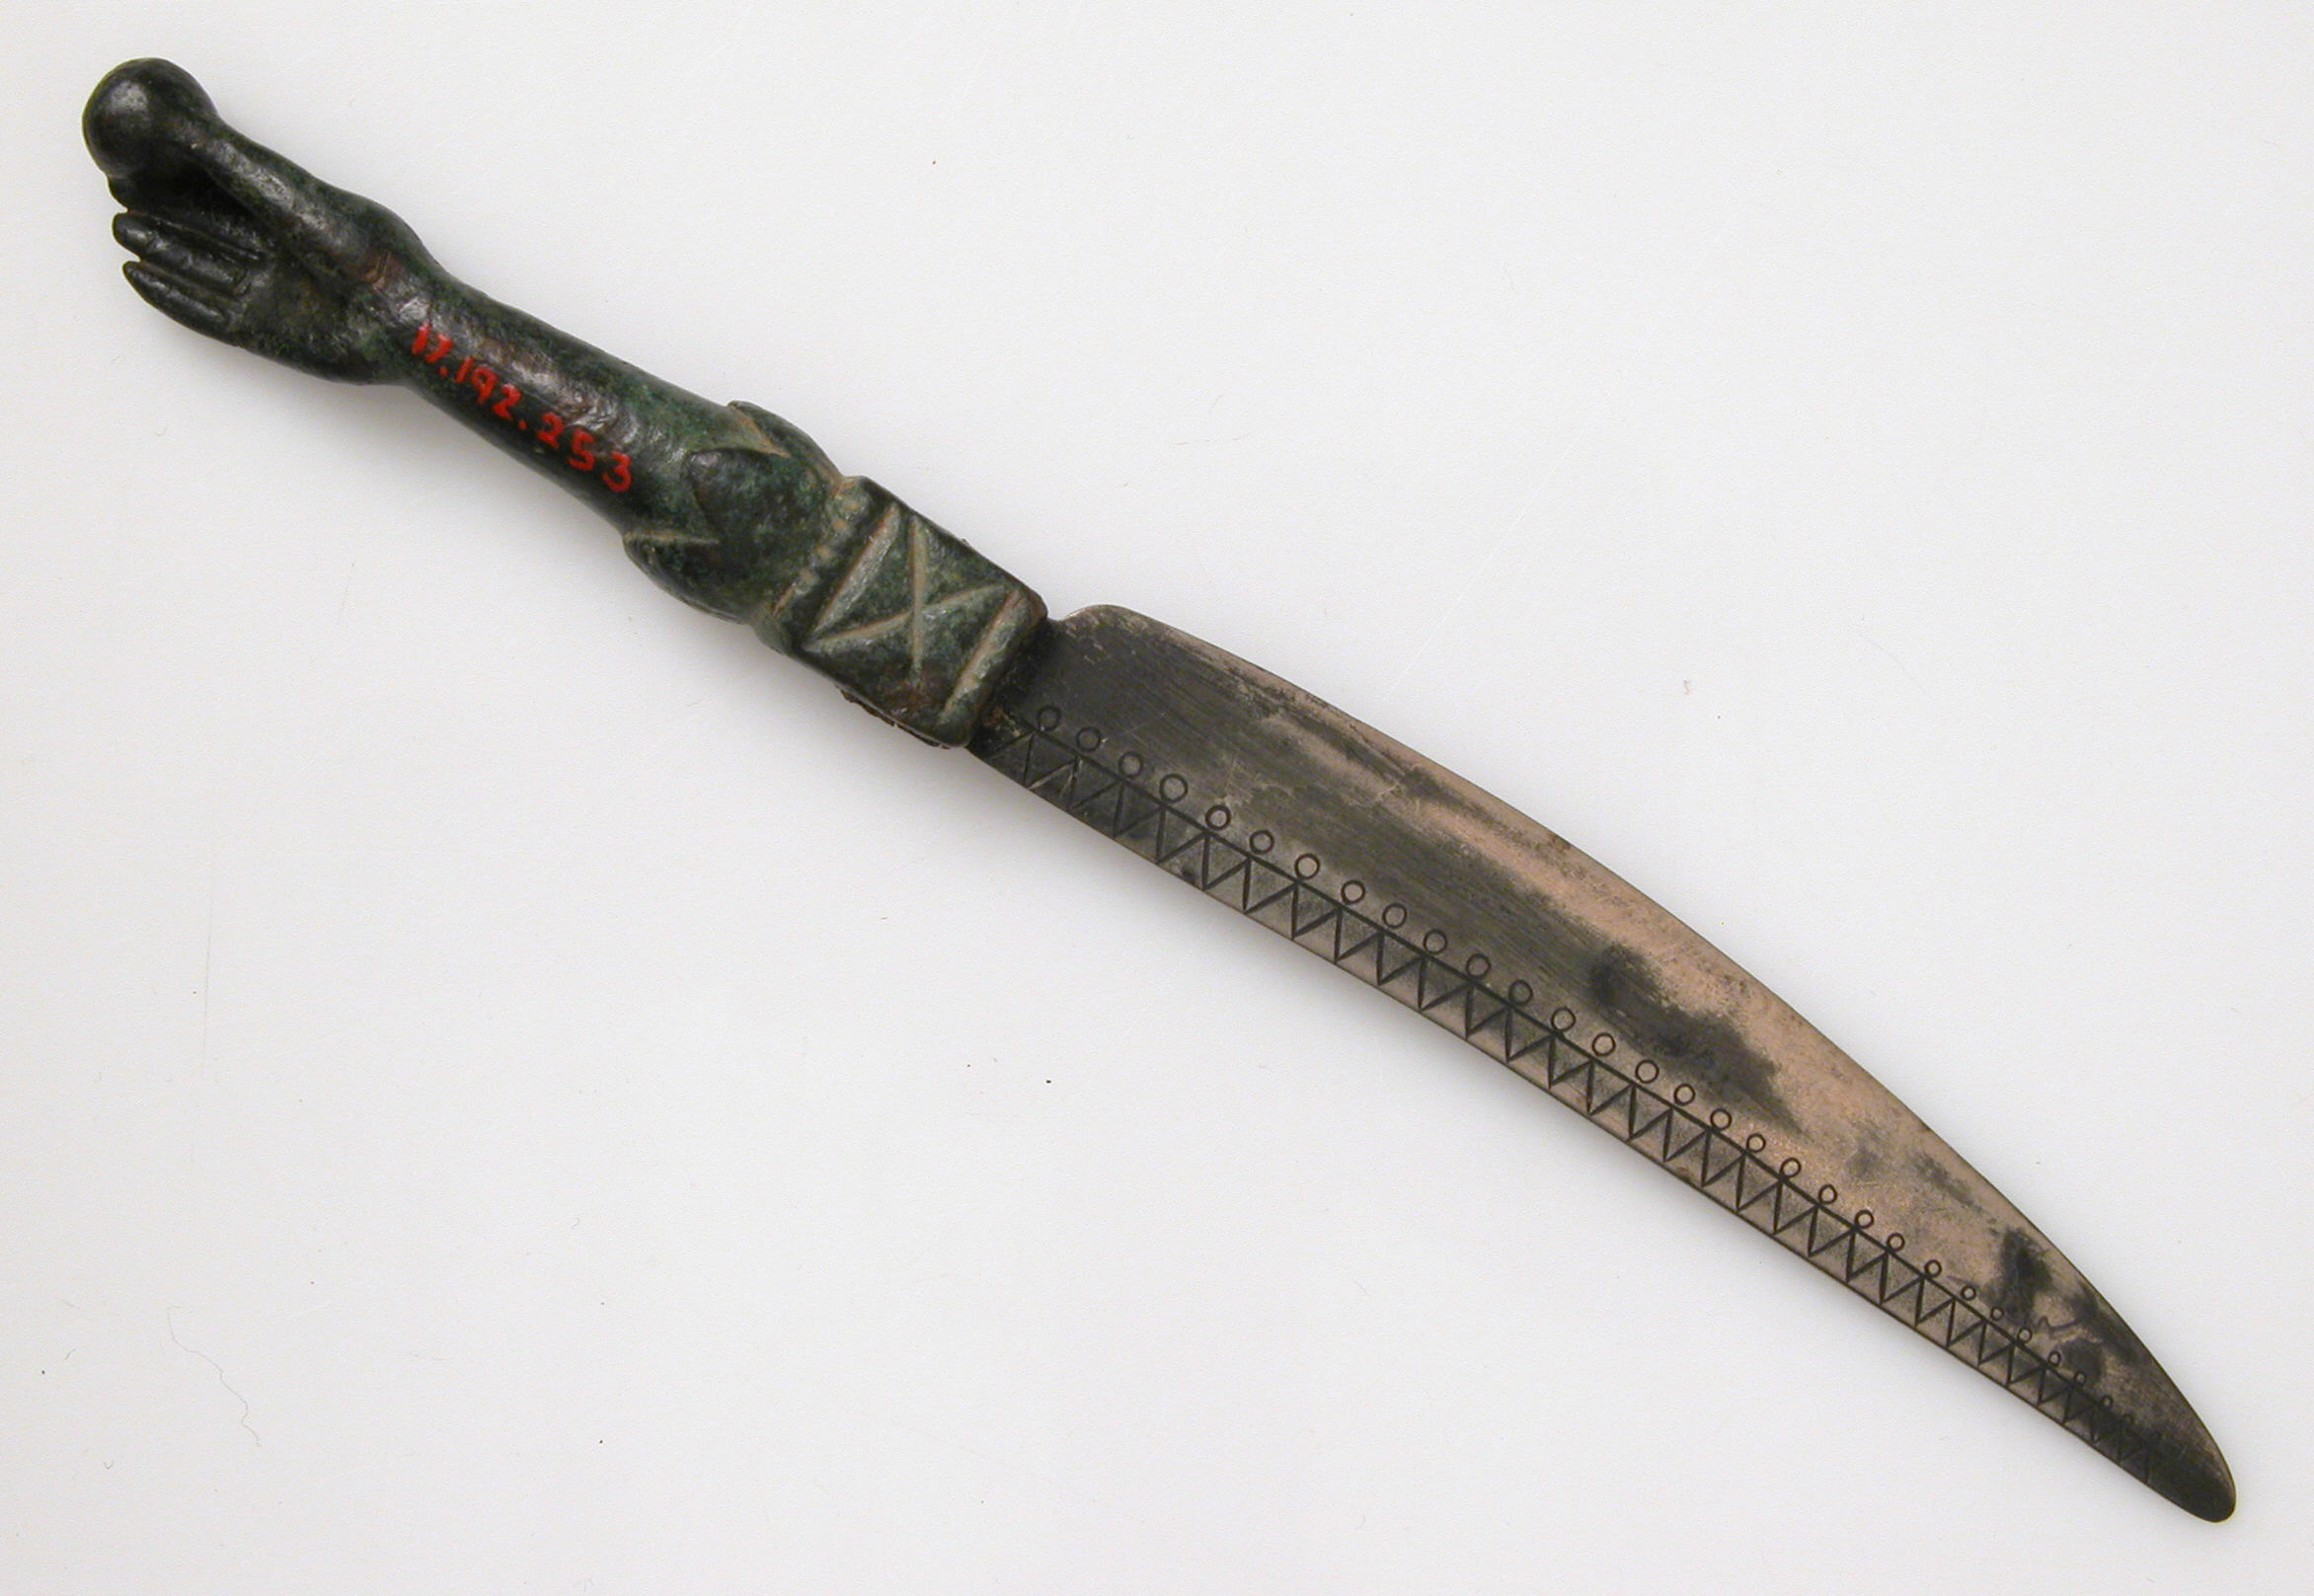 Knife with copper alloy handle & steel blade. 3rd c. CE ca - late Roman.jpg